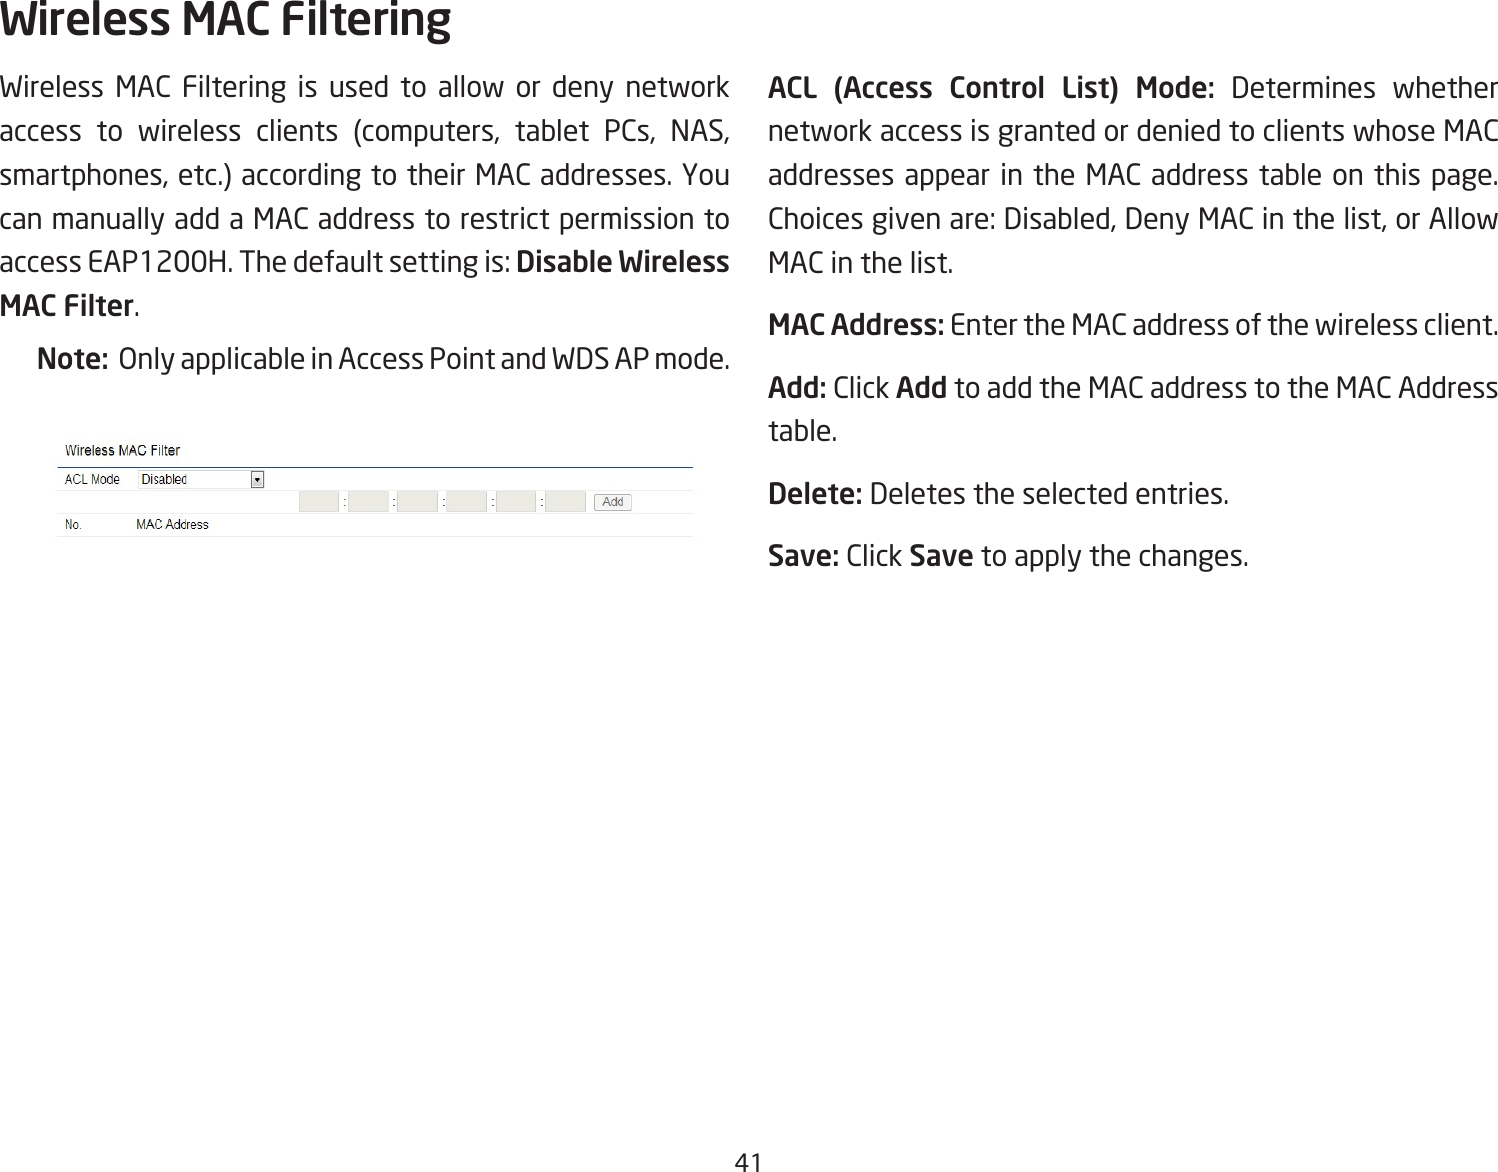 41Wireless MAC Filtering is used to allow or deny network access to wireless clients (computers, tablet PCs, NAS,smartphones,etc.)accordingtotheirMACaddresses.Youcan manually add a MAC address to restrict permission to accessEAP1200H.Thedefaultsettingis:Disable Wireless MAC Filter.Note:  Only applicable in Access Point and WDS AP mode.ACL  (Access  Control  List)  Mode: Determines whether network access is granted or denied to clients whose MAC addresses appear in the MAC address table on this page. Choicesgivenare:Disabled,DenyMACinthelist,orAllowMAC in the list.MAC Address: Enter the MAC address of the wireless client.Add: Click Add to add the MAC address to the MAC Address table.Delete: Deletes the selected entries.Save: Click Save to apply the changes.Wireless MAC Filtering